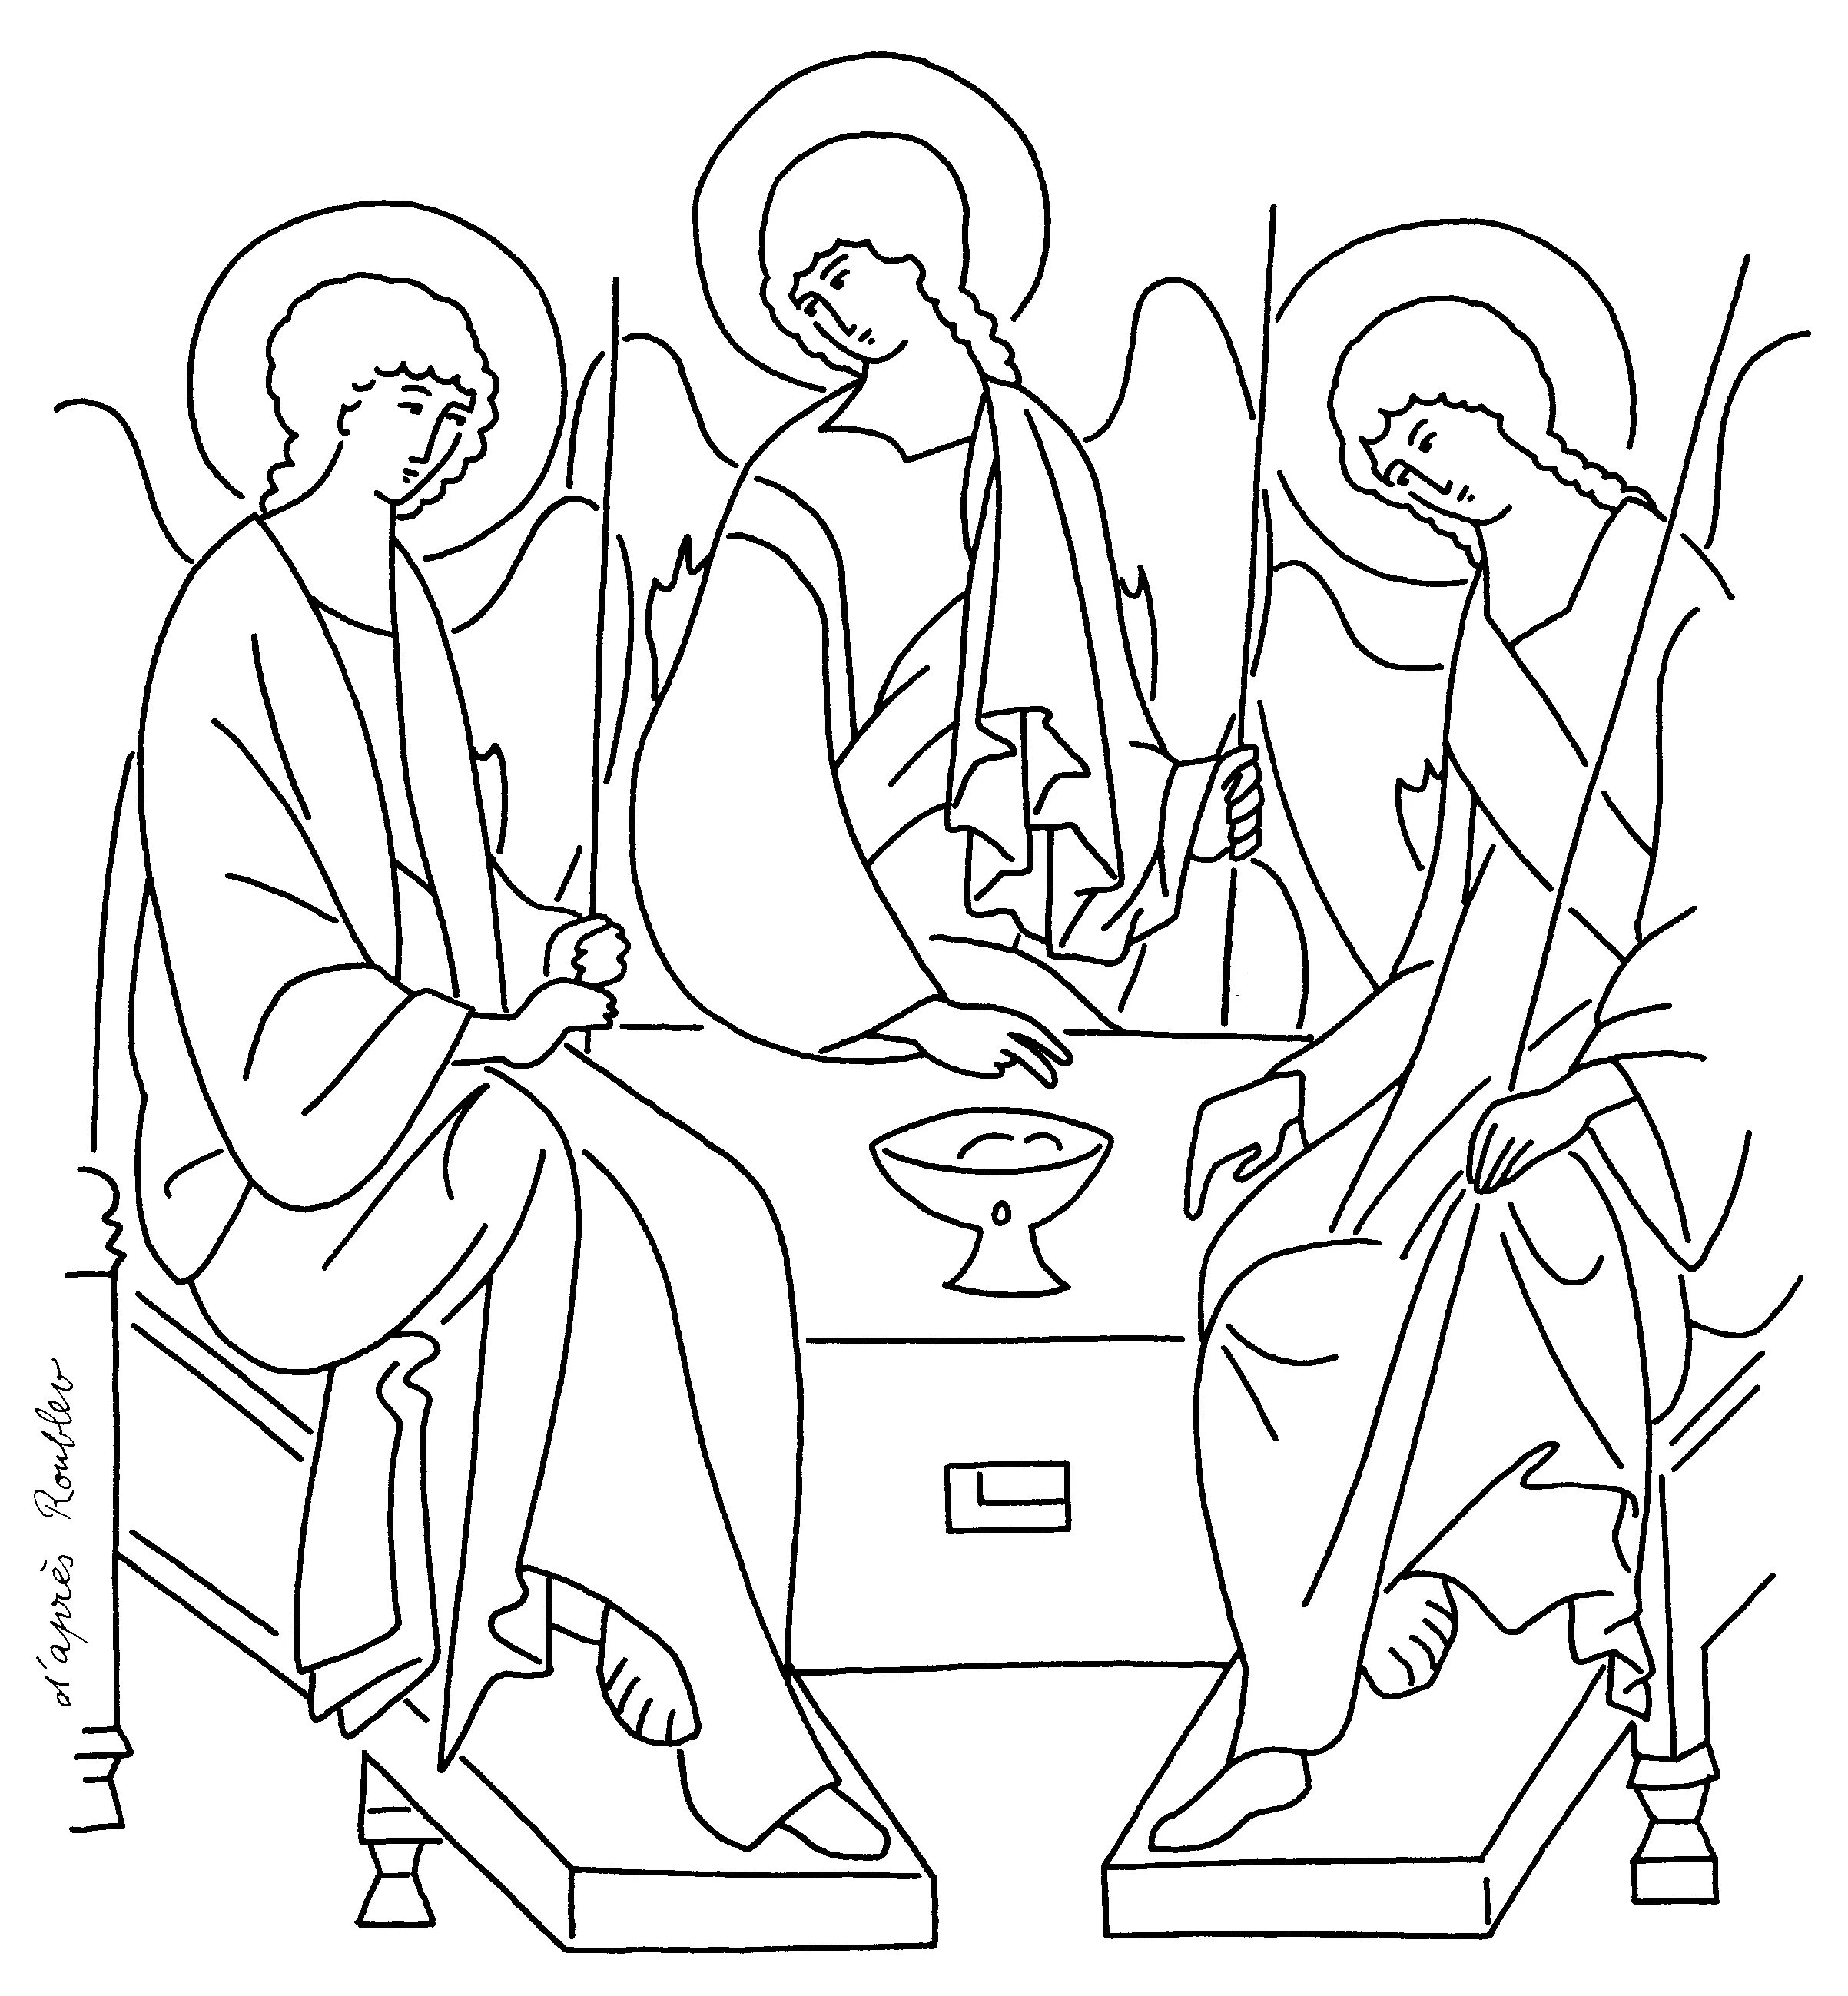 Exciting orthodox coloring book